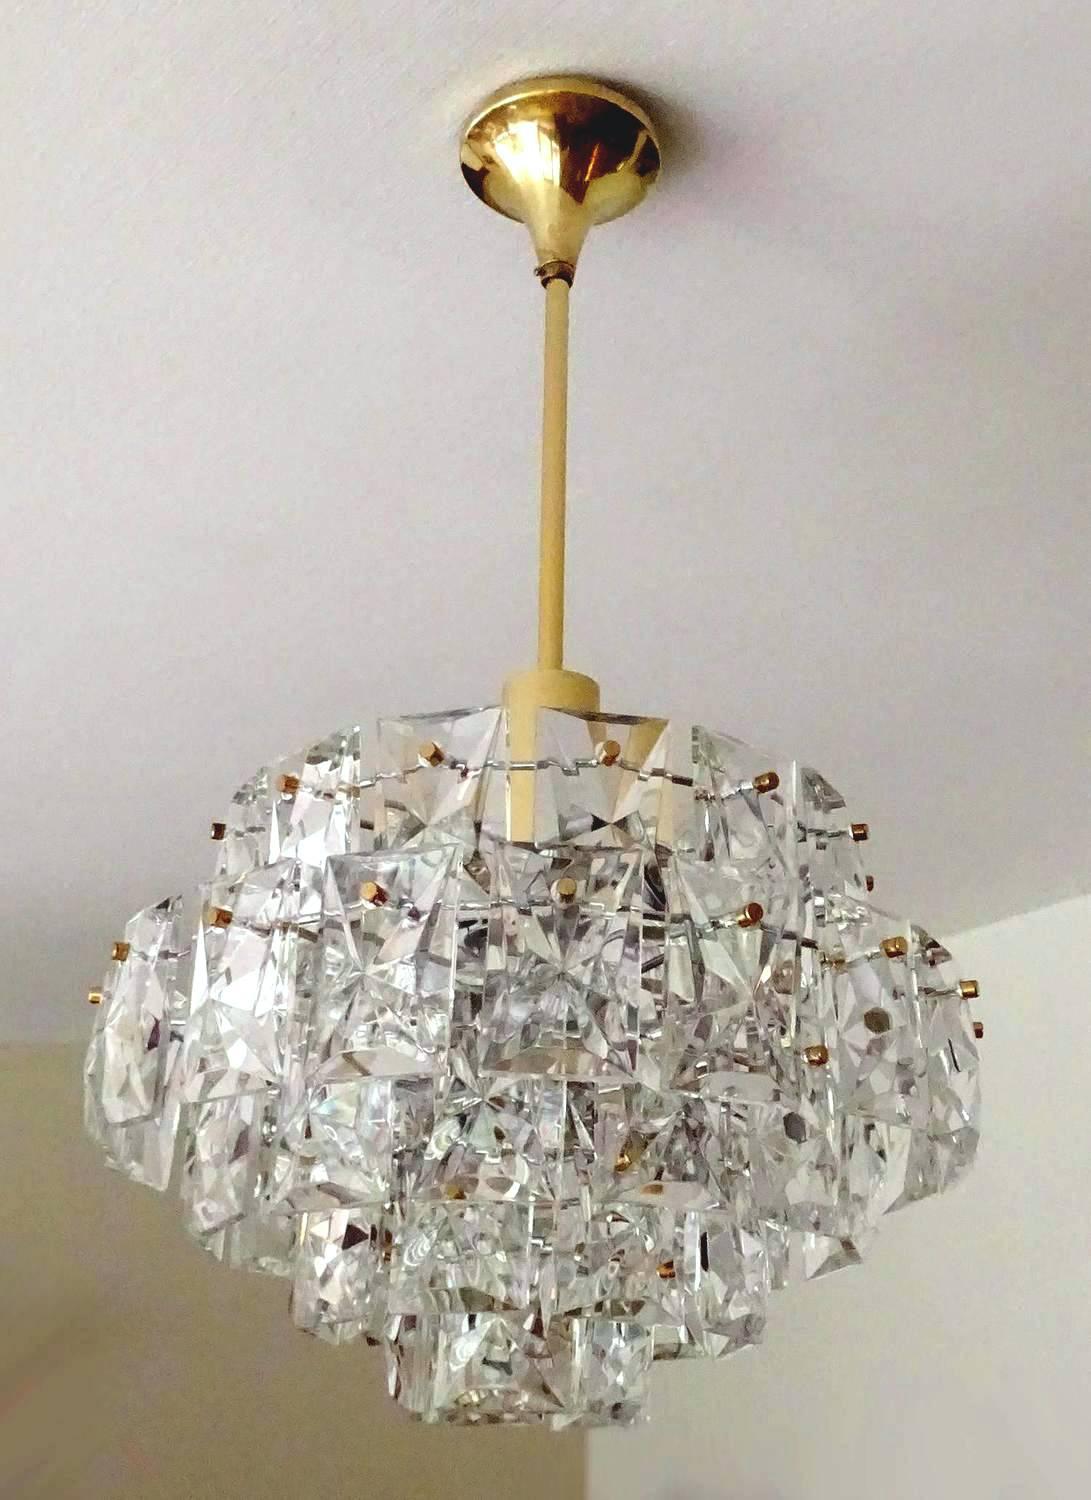 Large Kinkeldey chandelier with faceted square crystals, circa 1970, structure of chrome and brass.

Dimensions
28.74 in. H / 73 cm H
Diameter
16.54 in. (42 cm)

9 candelabra size, 40 watts each and 1 standard bulb, 60 watts 



Kinkeldey, a